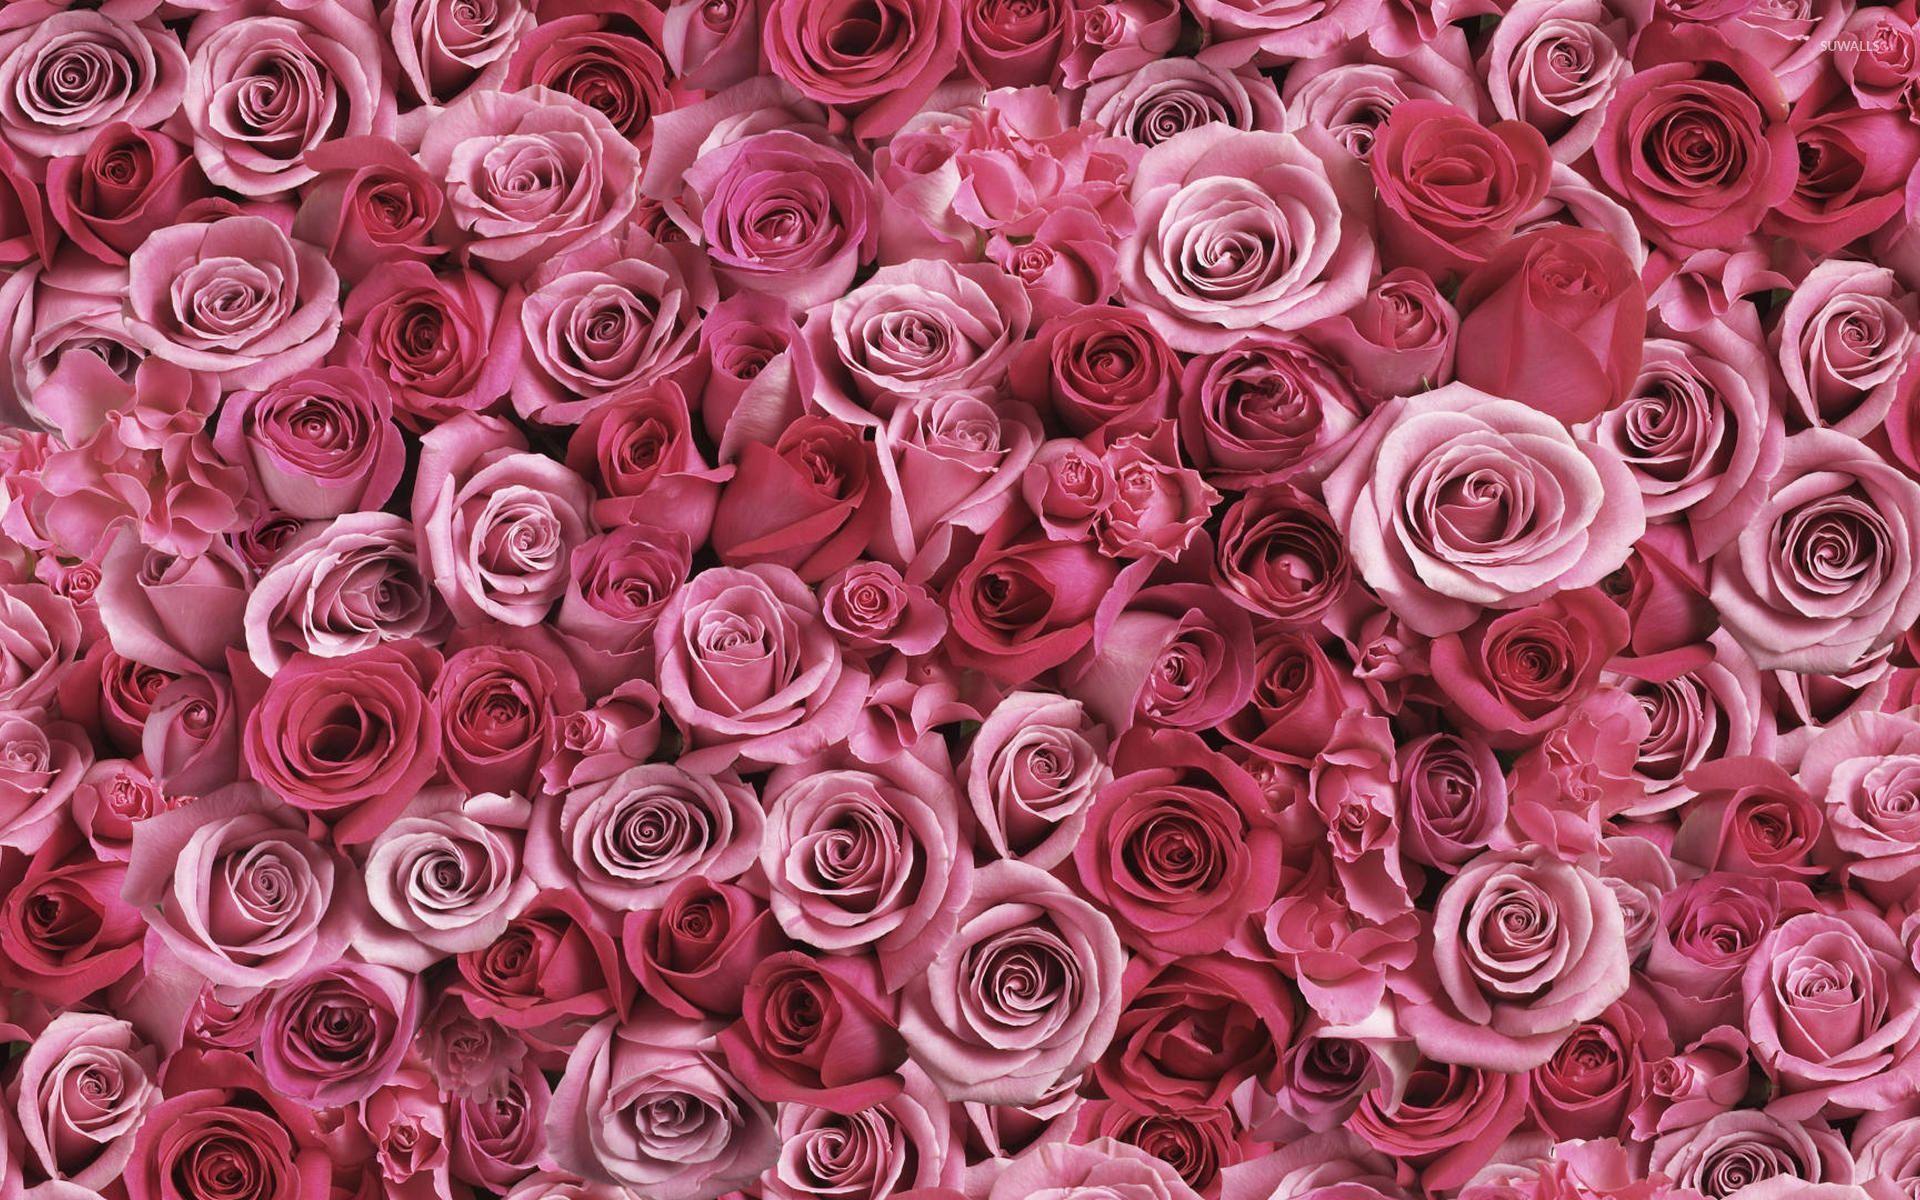 Stunning Roses Wallpaper image For Free Download.cat<